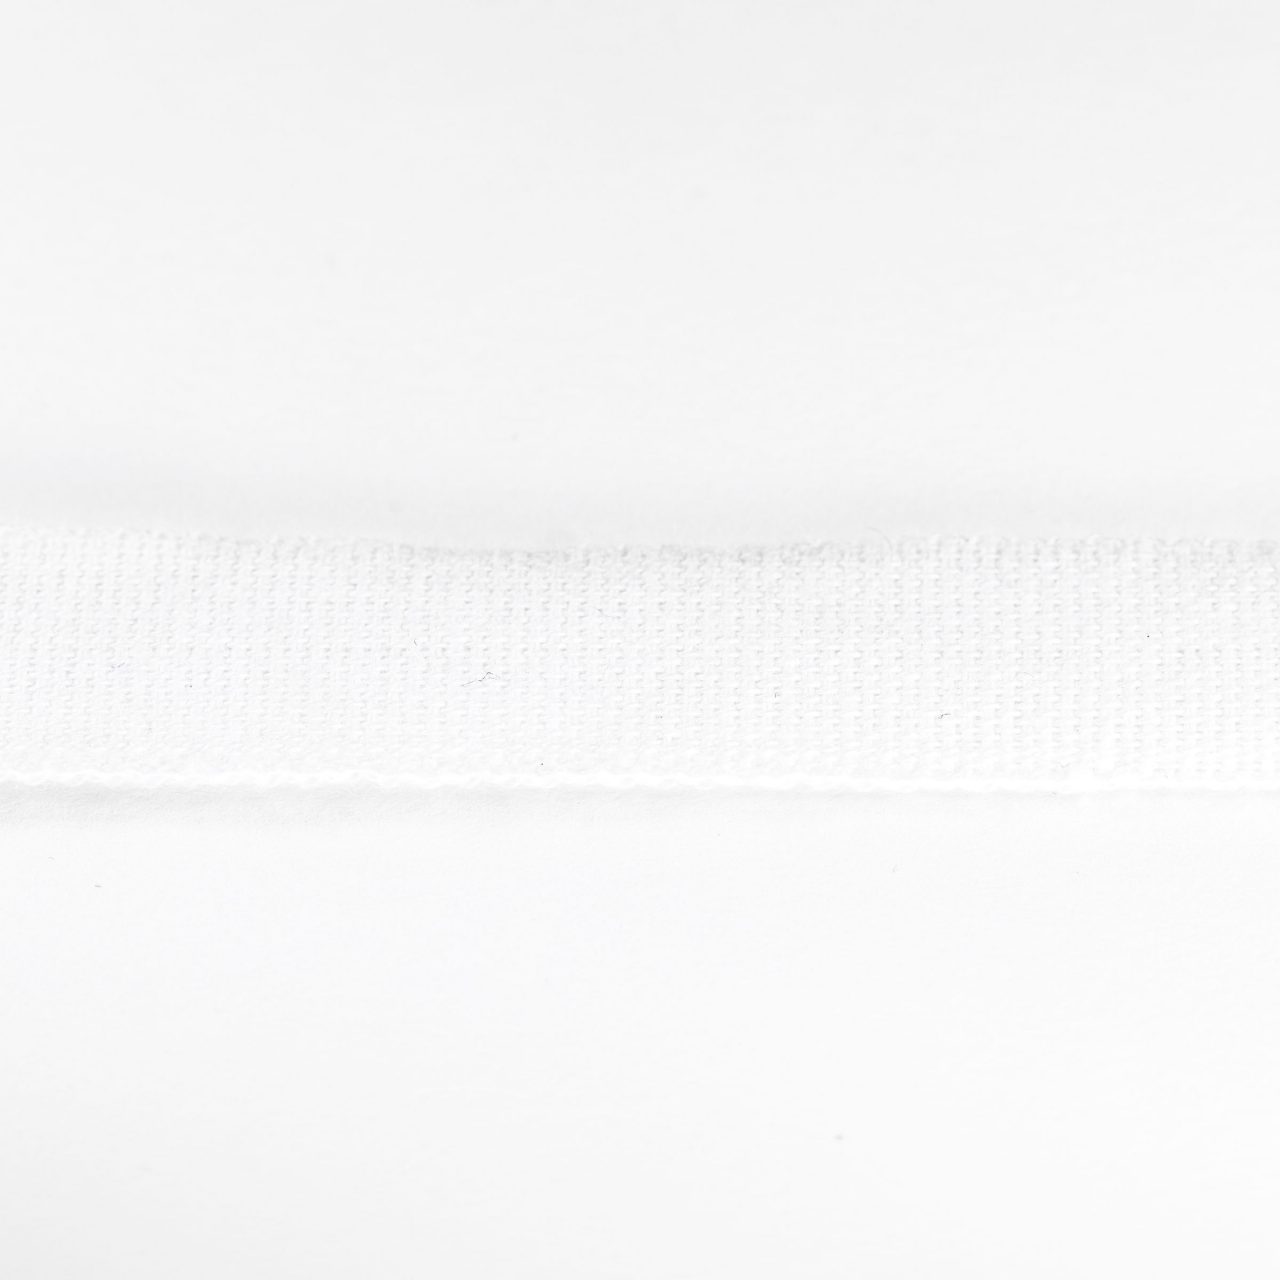 1001-12W_0001 12mm white cotton tape (Medical - trachy cord)